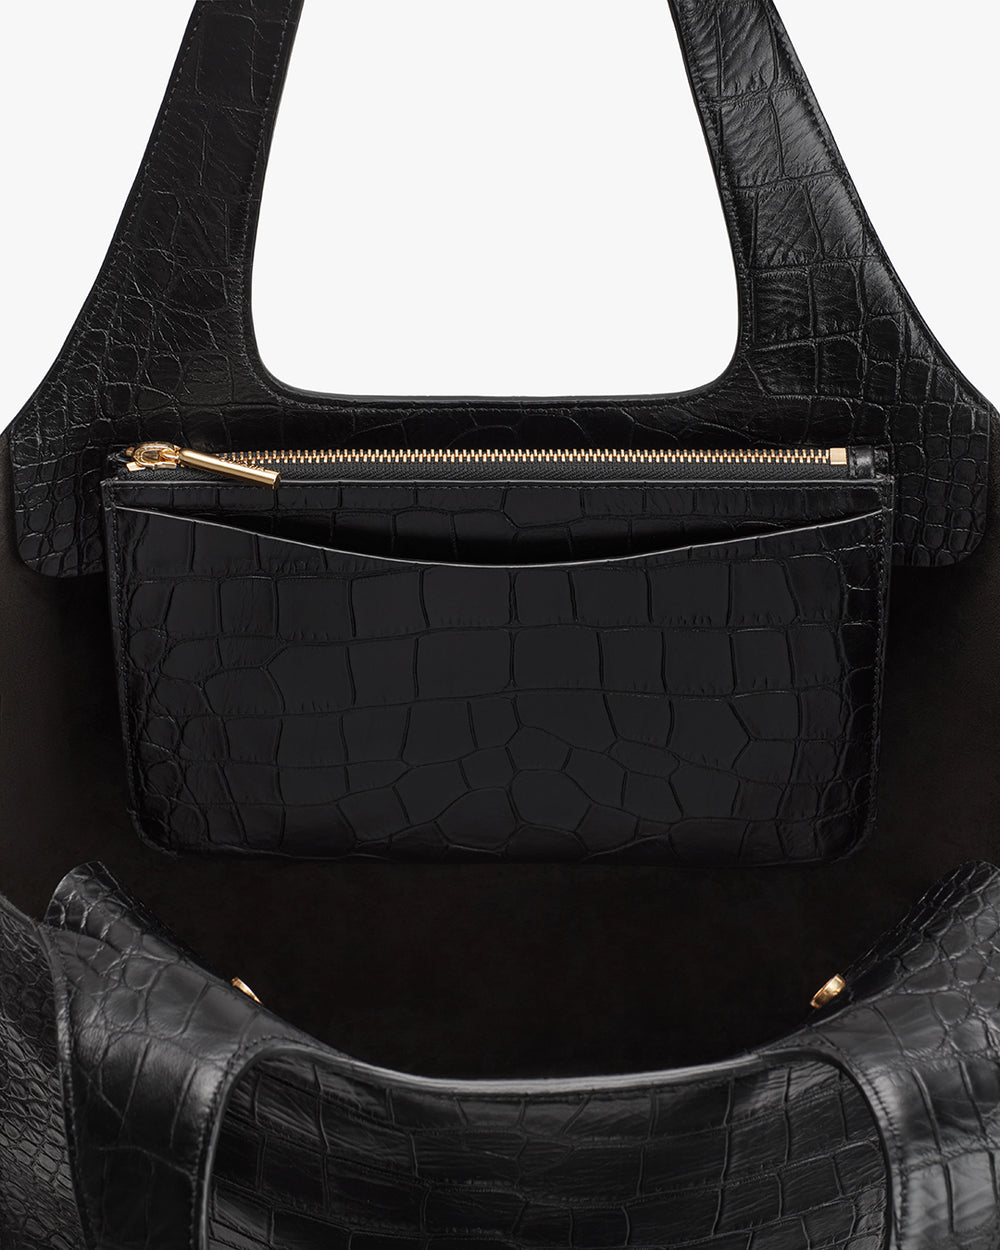 Handbag with a smaller pouch attached by a zipper.